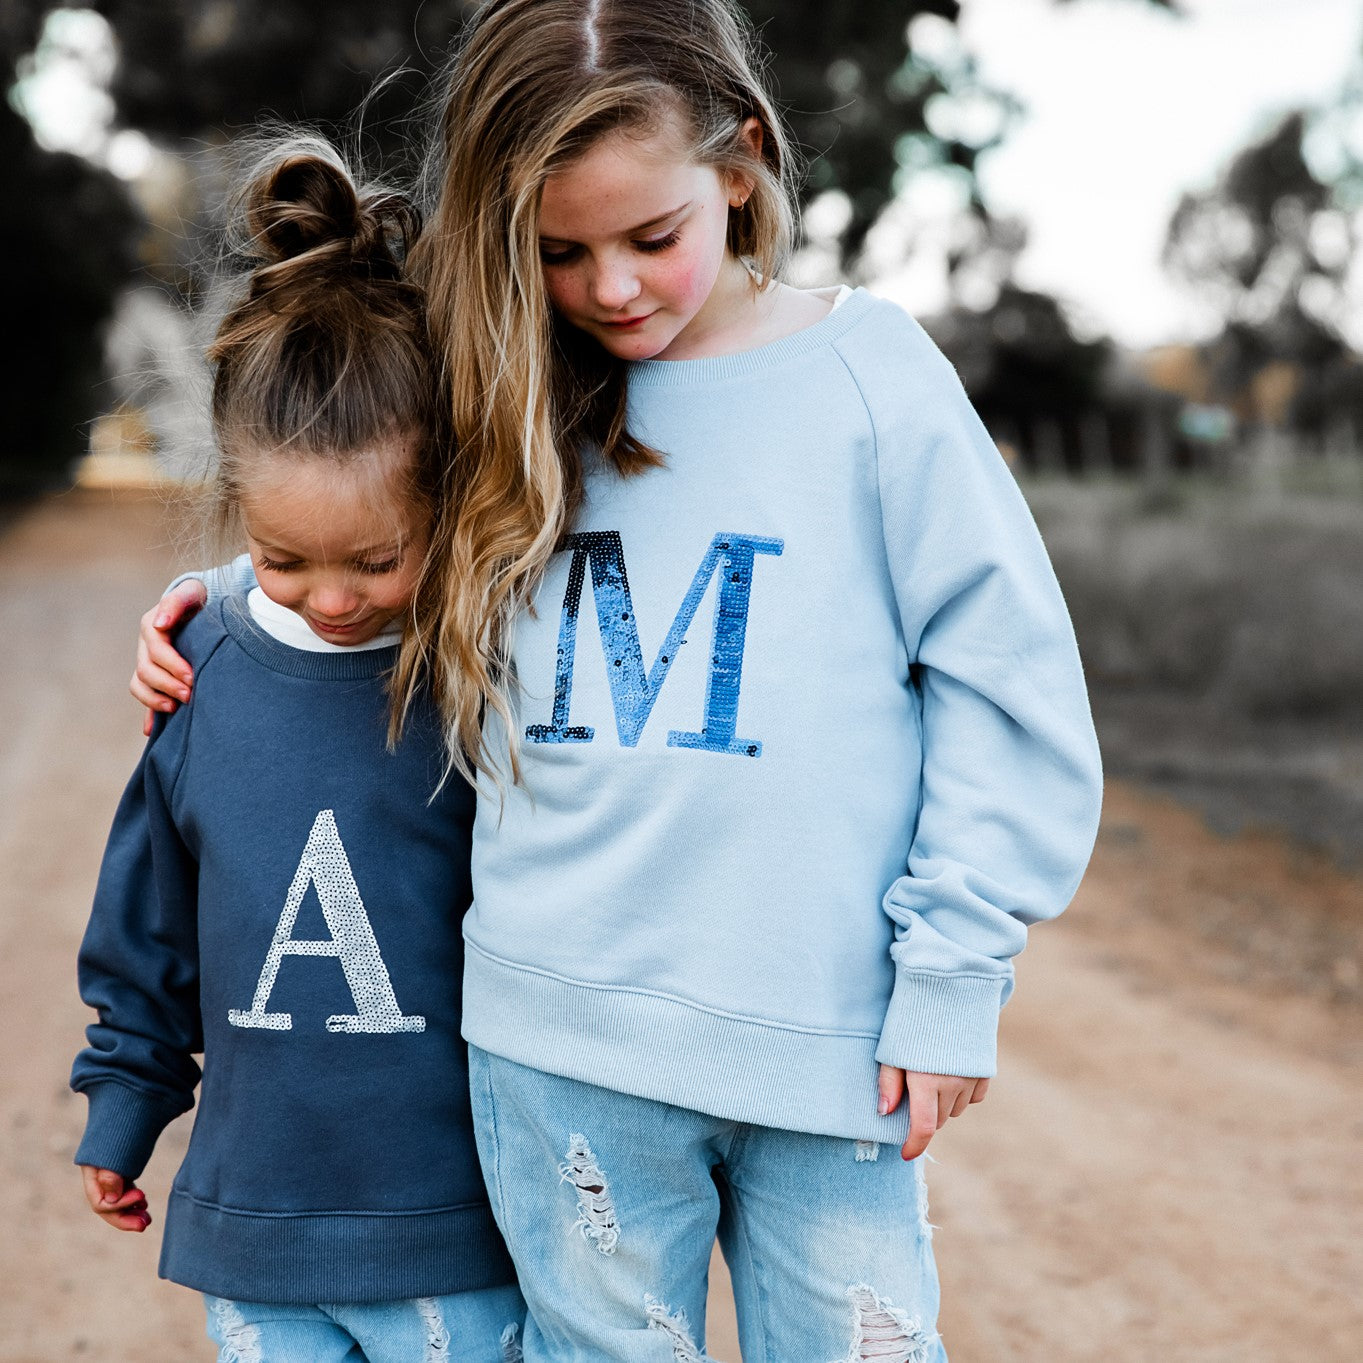 Girls Monogram Sweater - Blue with navy sequin - Branche Store